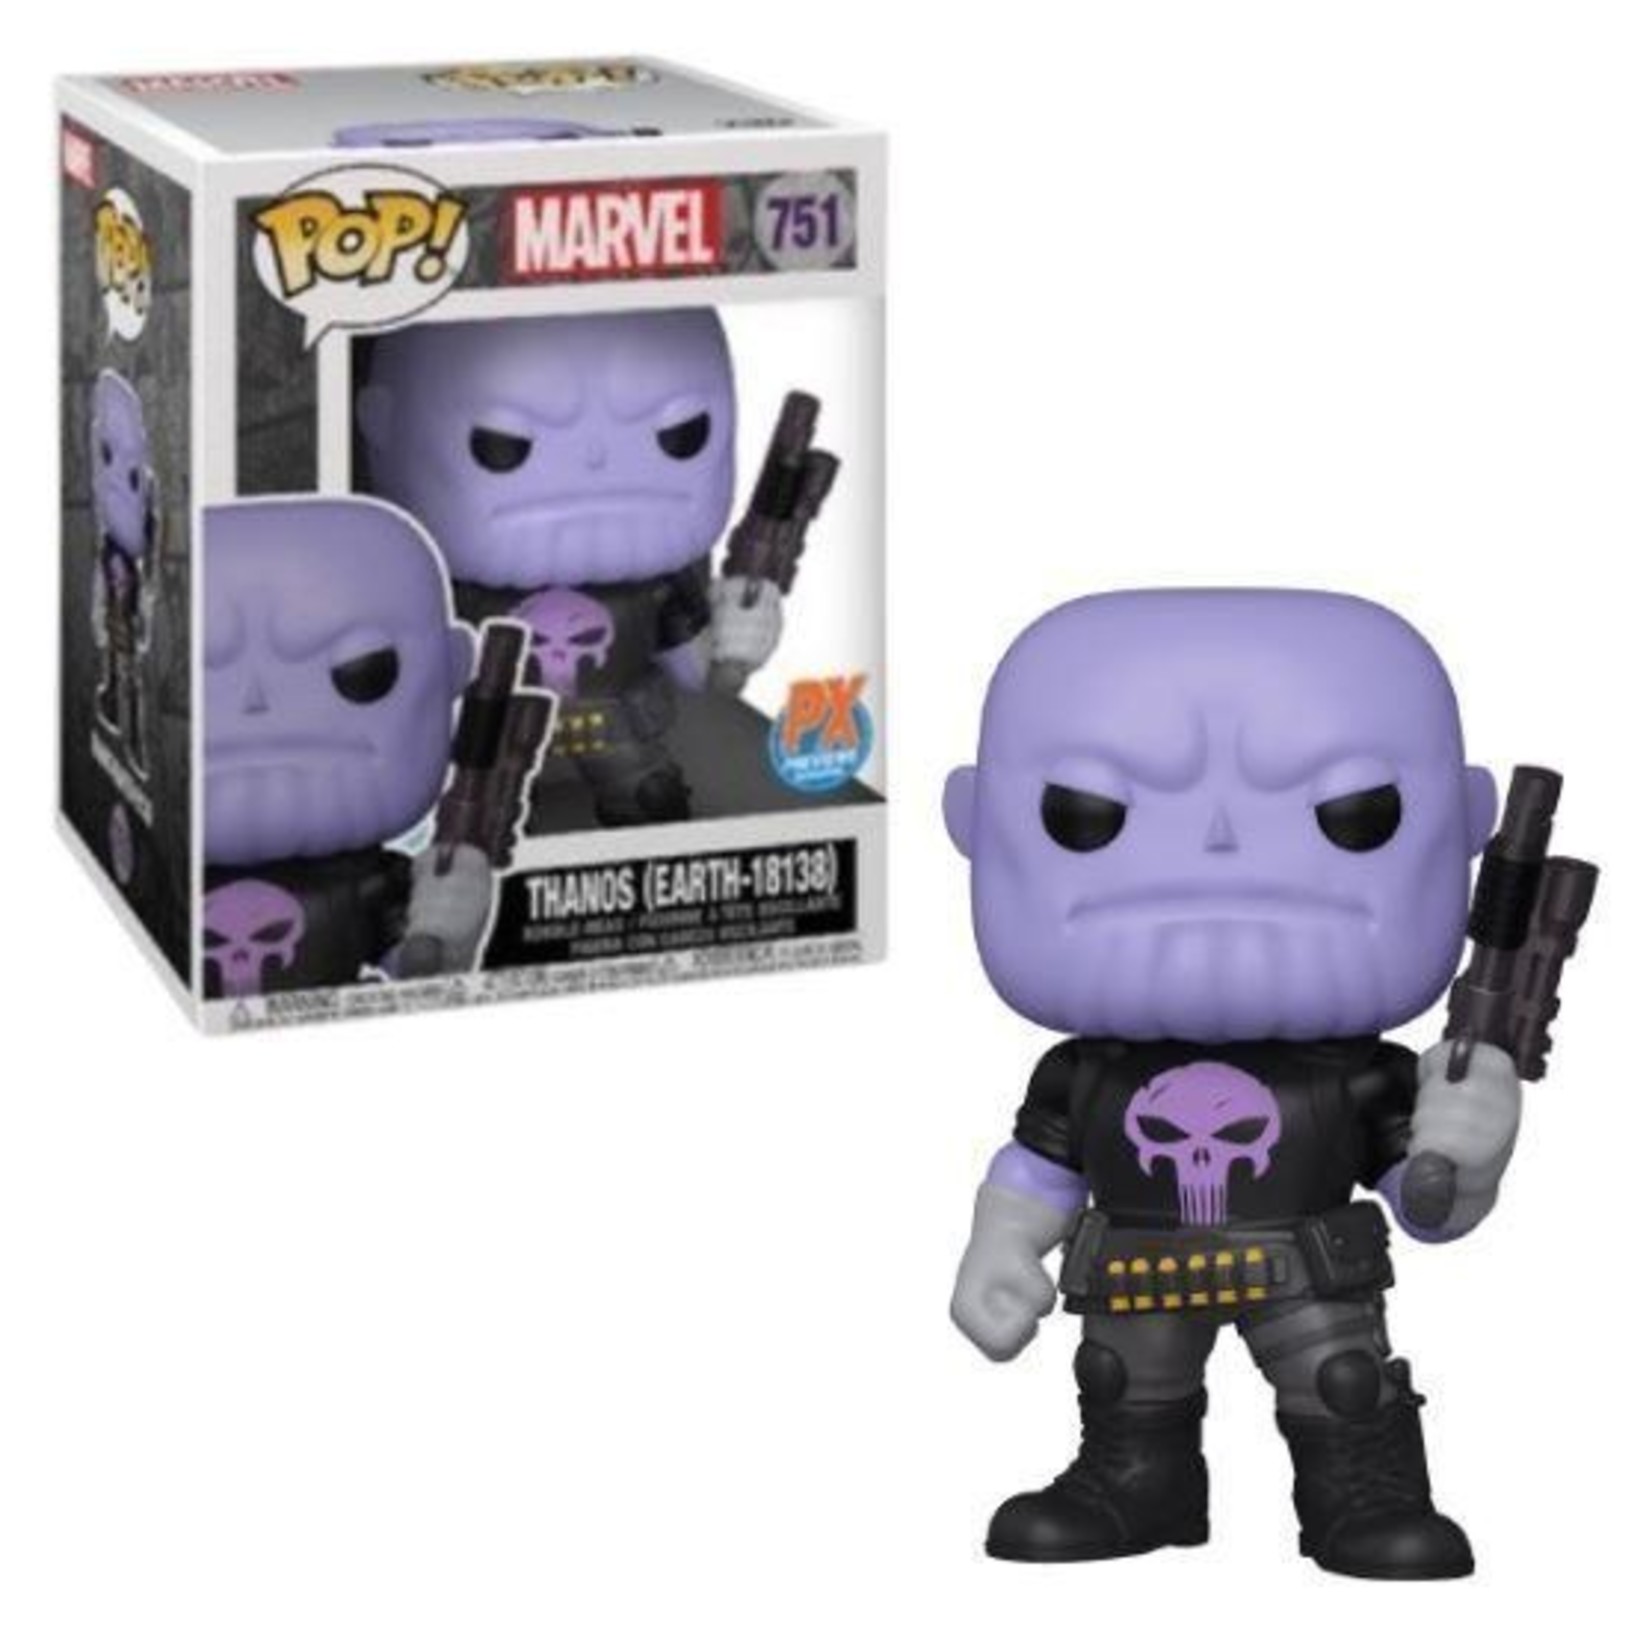 Thanos Punisher Earth-18138 PX